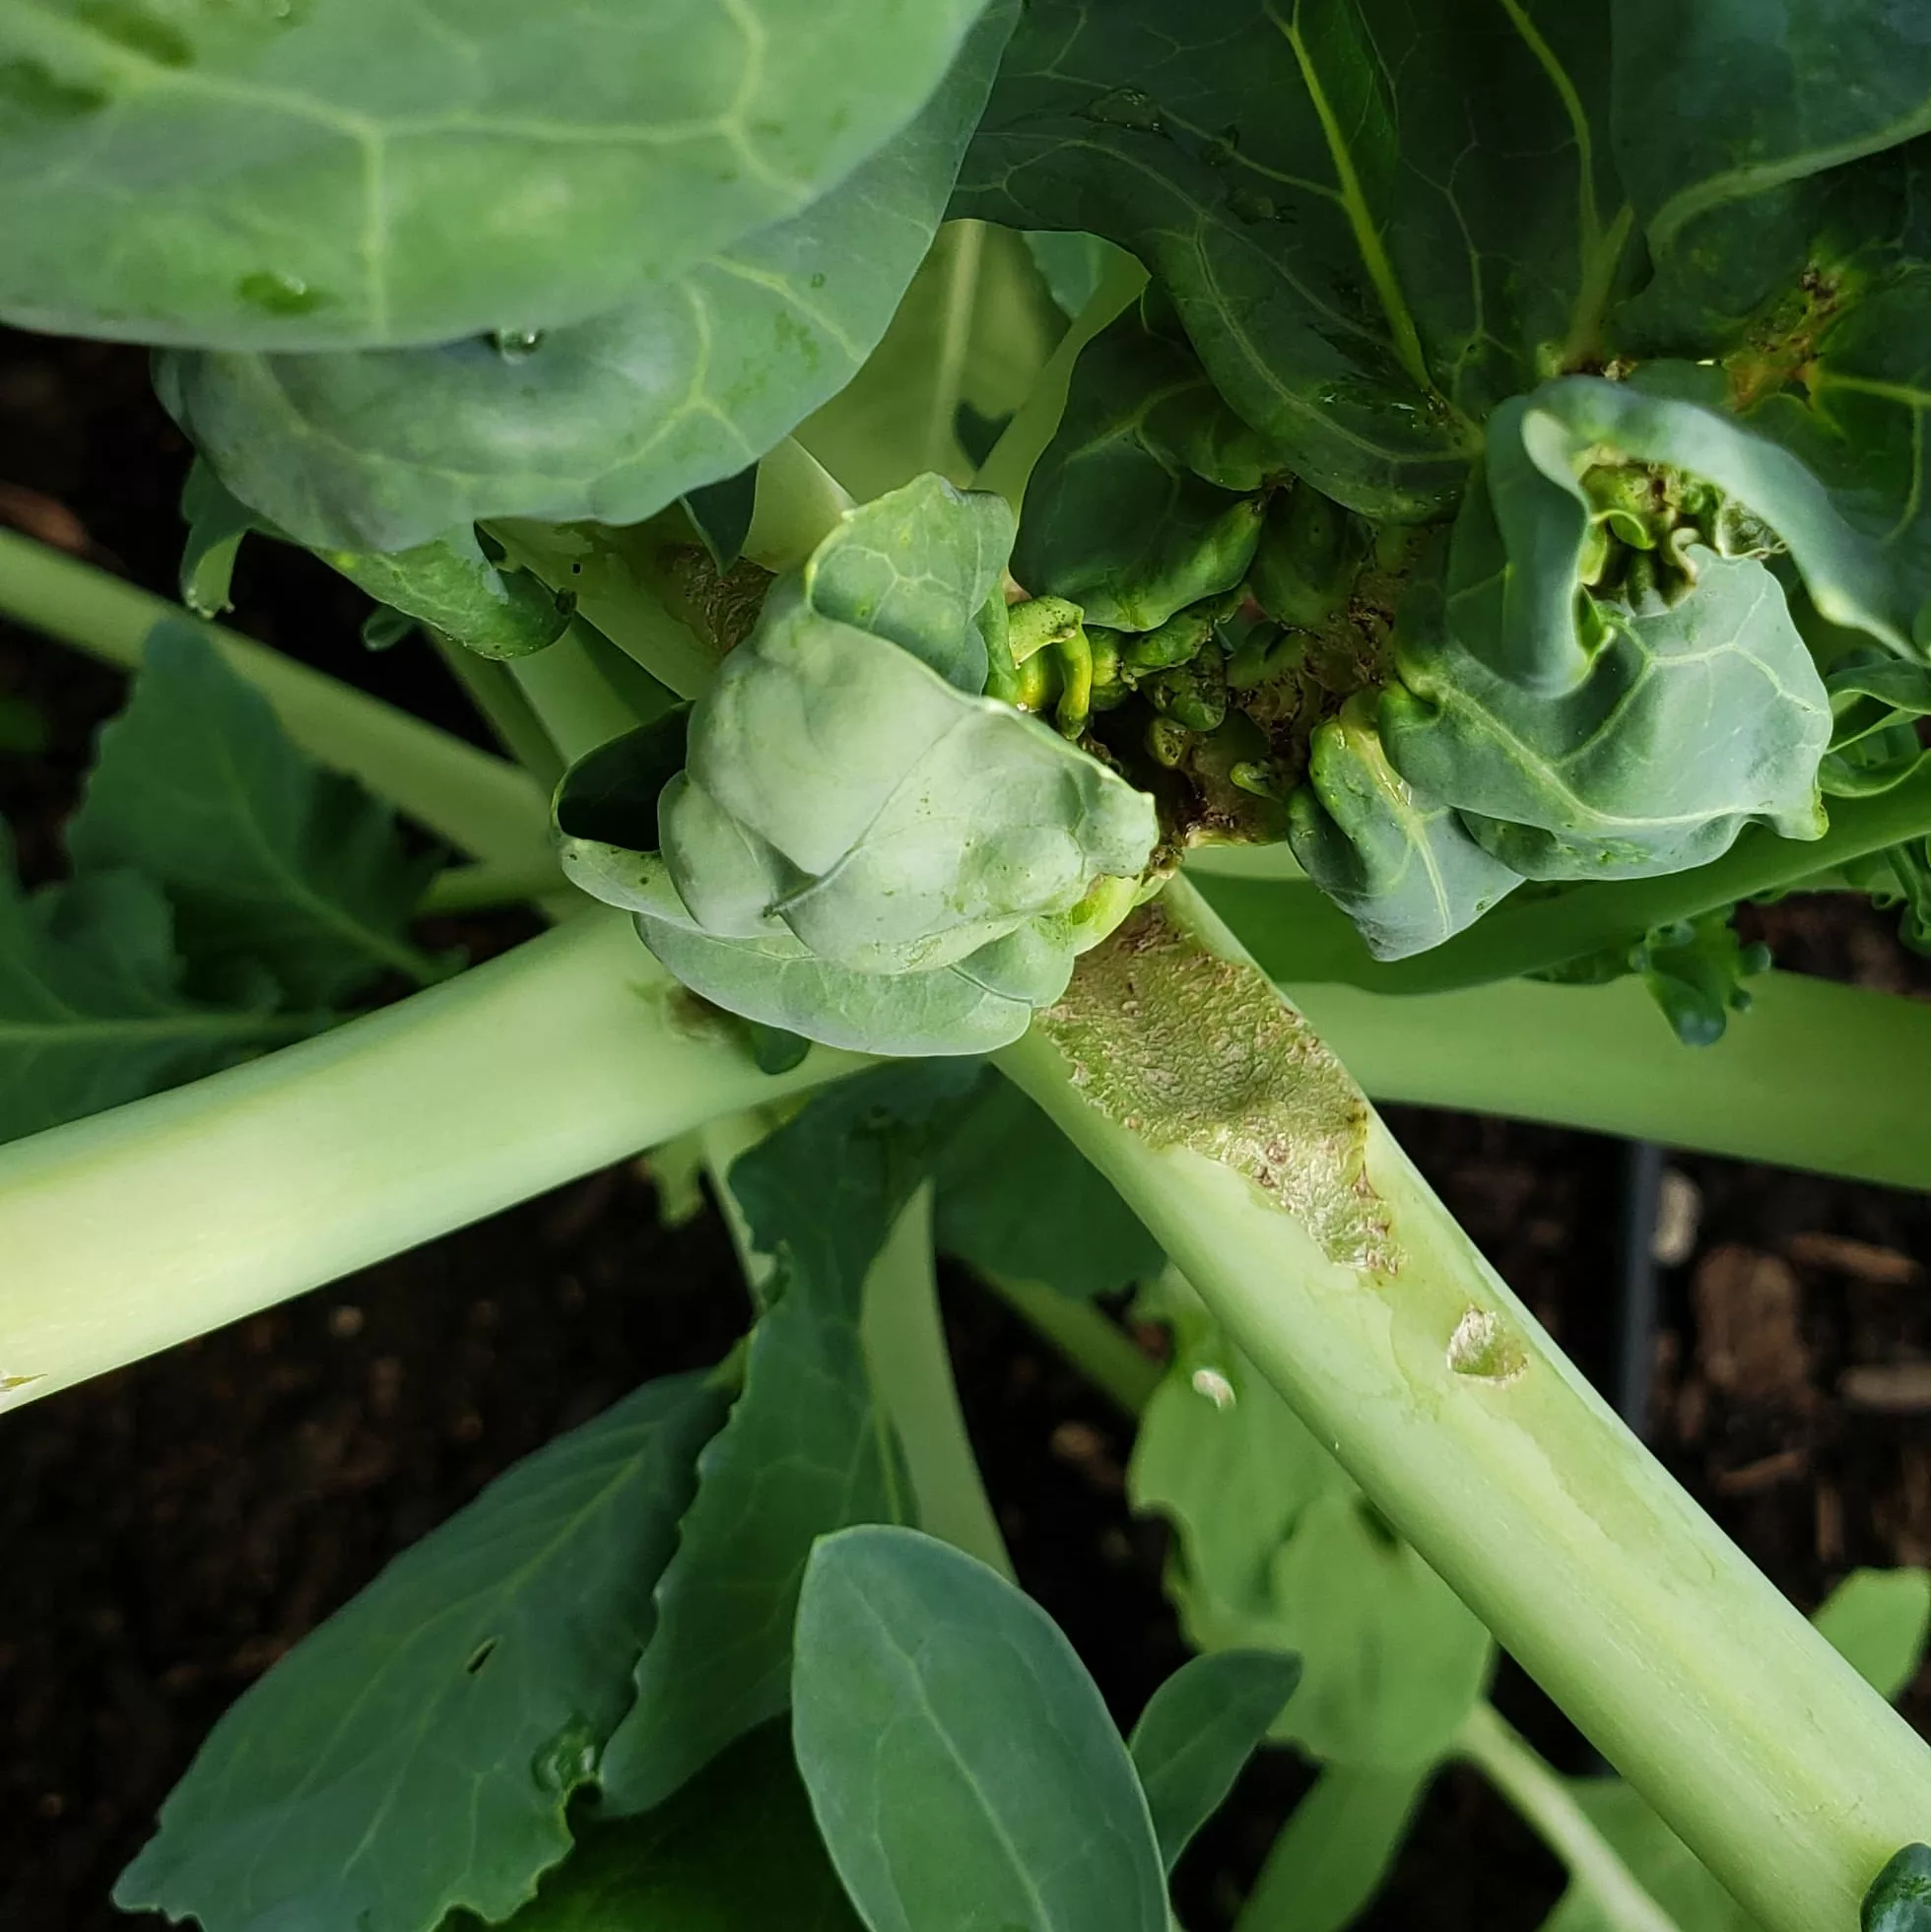 Swede midge damage on a broccoli causing blindness